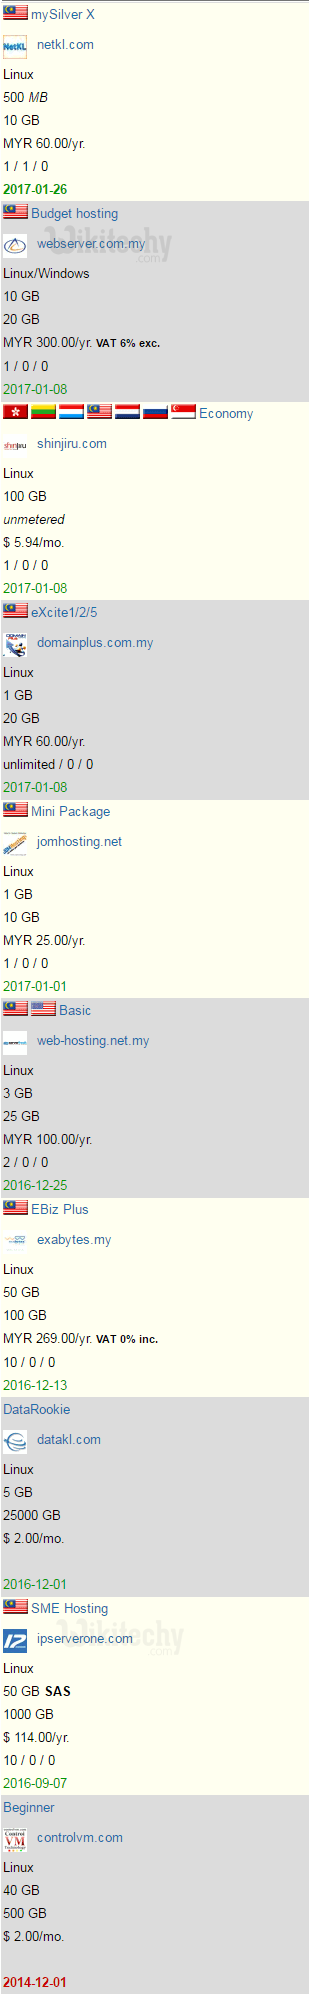 Hosting Shared Web Hosting Malaysia Top 10 Rank Best Shared Images, Photos, Reviews